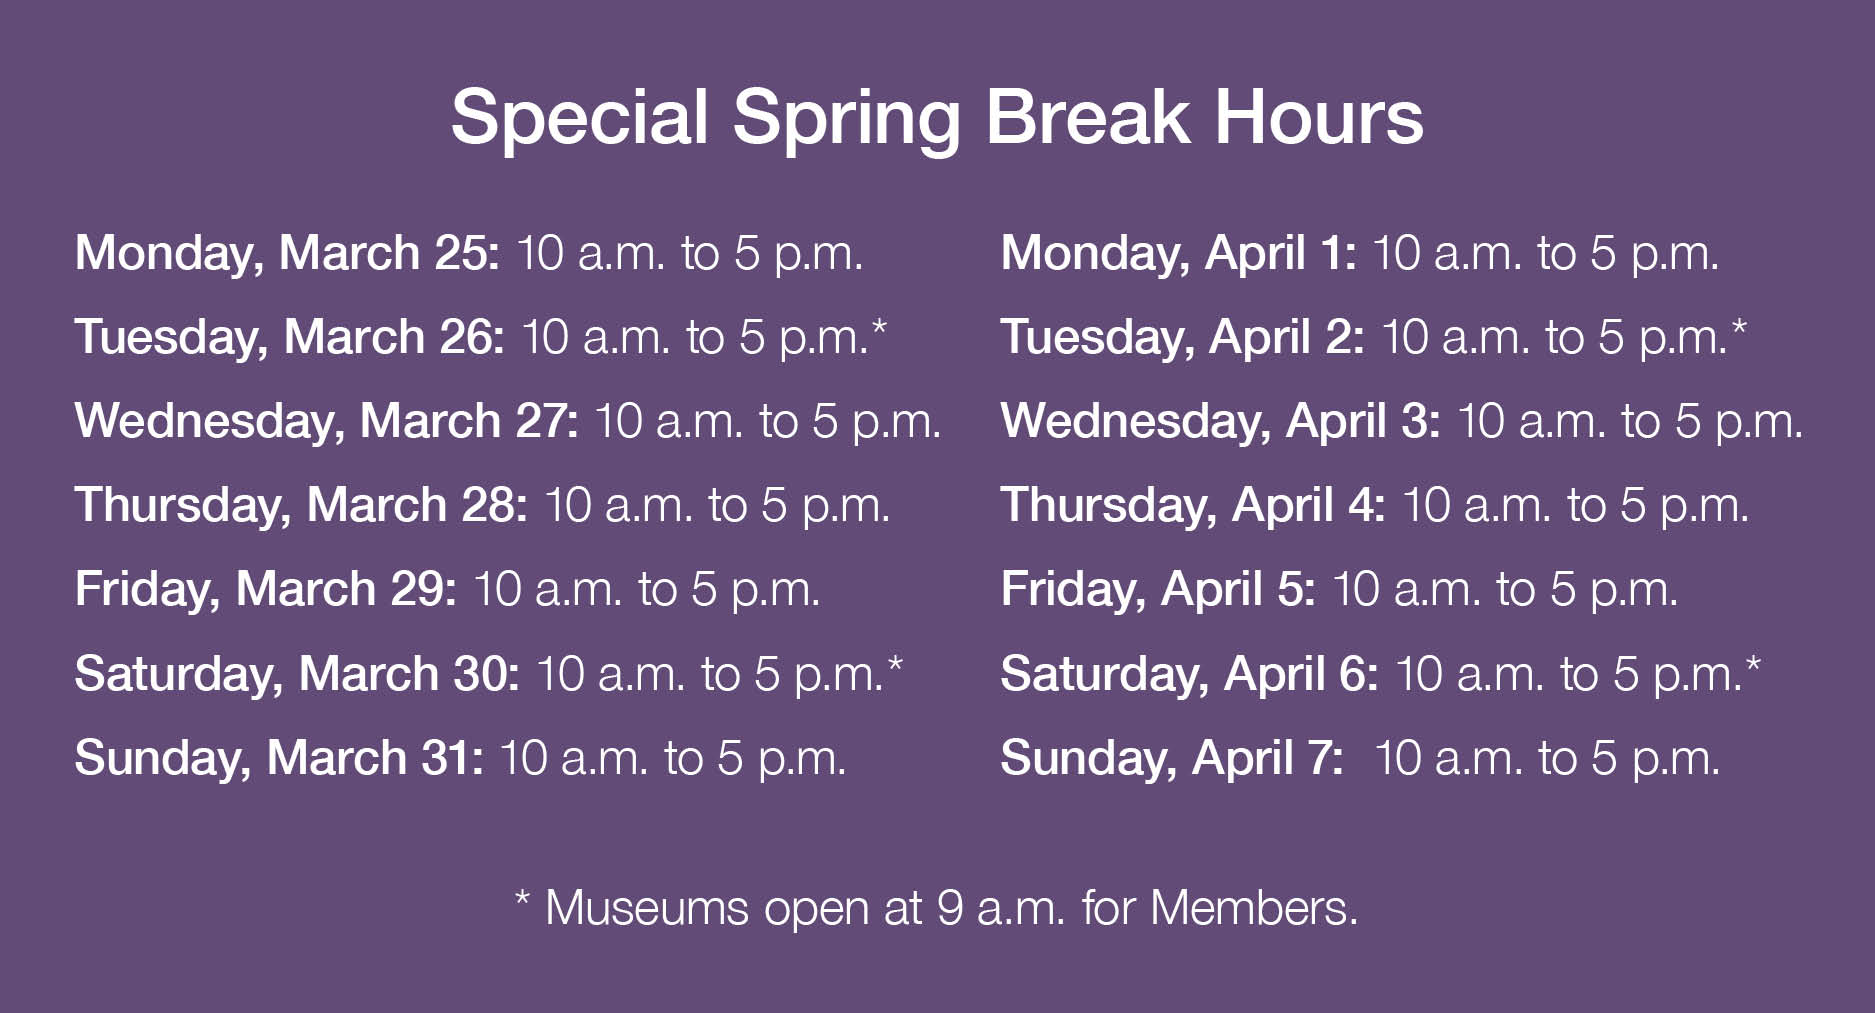 Special Spring Break Hours. Monday, March 25: 10 a.m. to 5 p.m.; Tuesday, March 26: 10 a.m. to 5 p.m.*; Wednesday, March 27: 10 a.m. to 5 p.m.; Thursday, March 28: 10 a.m. to 5 p.m.; Friday, March 29: 10 a.m. to 5 p.m.; Saturday, March 30: 10 a.m. to 5 p.m.*; Sunday, March 31: 10 a.m. to 5 p.m.; Monday, April 1: 10 a.m. to 5 p.m.; Tuesday, April 2: 10 a.m. to 5 p.m.*; Wednesday, April 3: 10 a.m. to 5 p.m.; Thursday, April 4: 10 a.m. to 5 p.m.; Friday, April 5: 10 a.m. to 5 p.m.; Saturday, April 6: 10 a.m. to 5 p.m.*; Sunday, April 7:  10 a.m. to 5 p.m. (* Museums open at 9 a.m. for Members.)